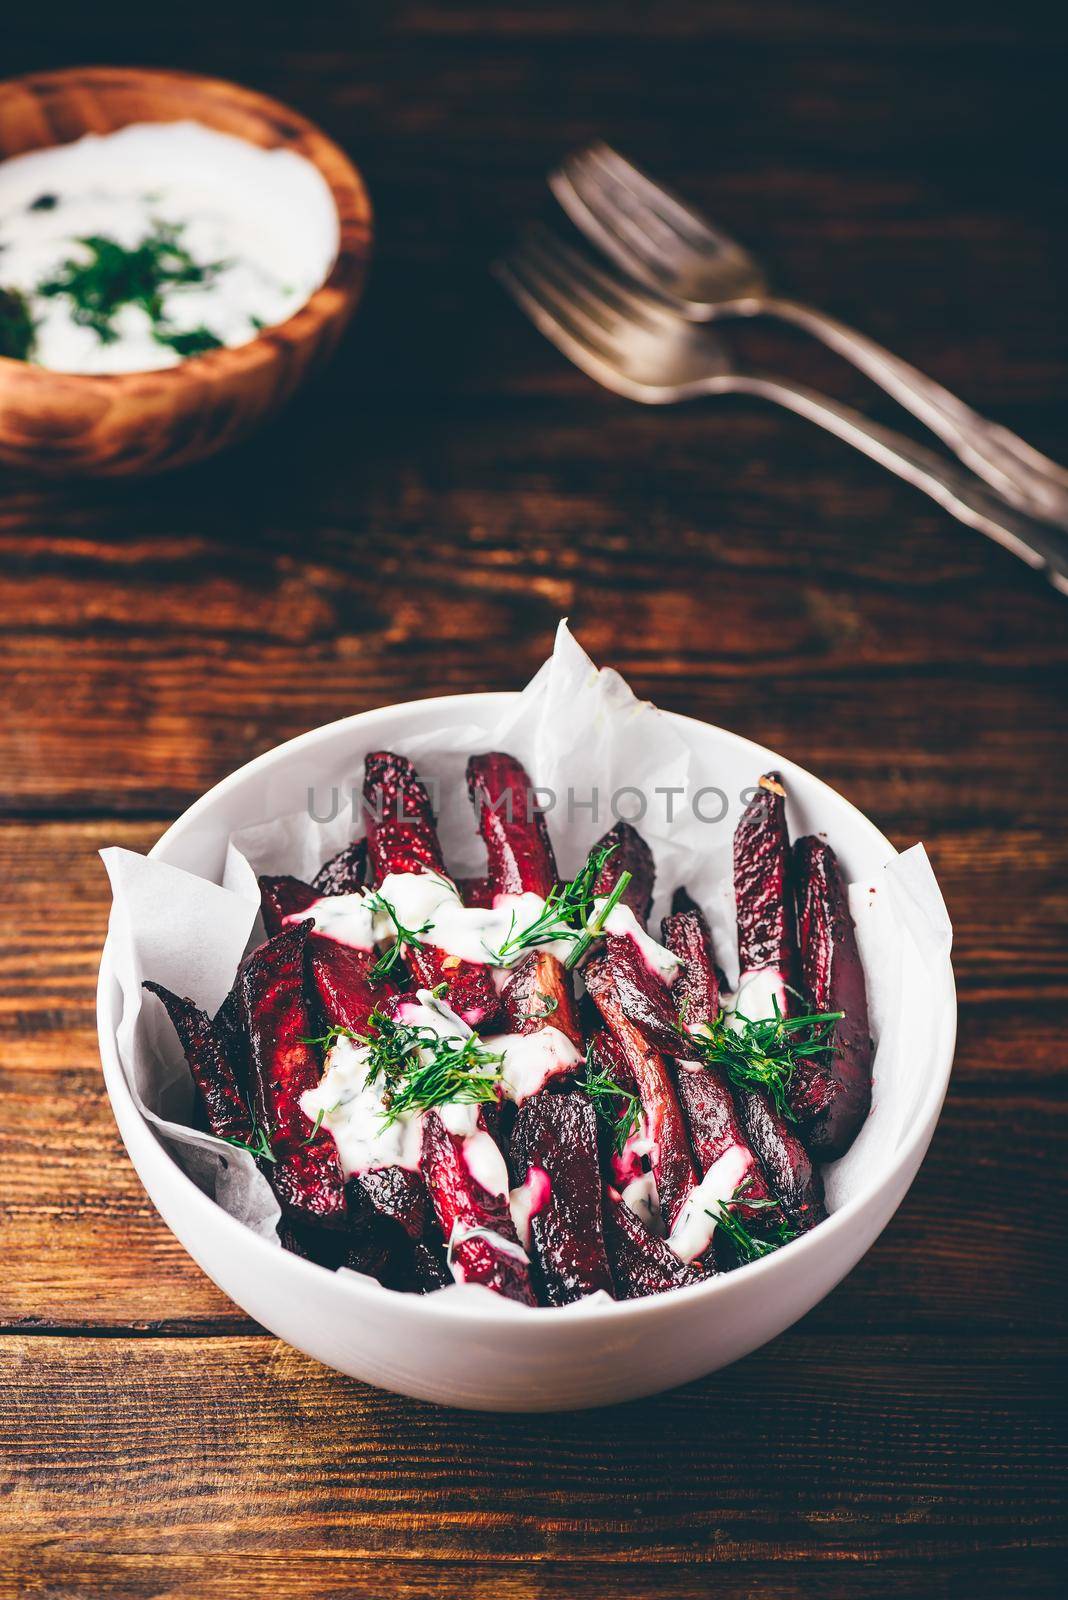 Oven baked beet with yogurt and dill dressing by Seva_blsv